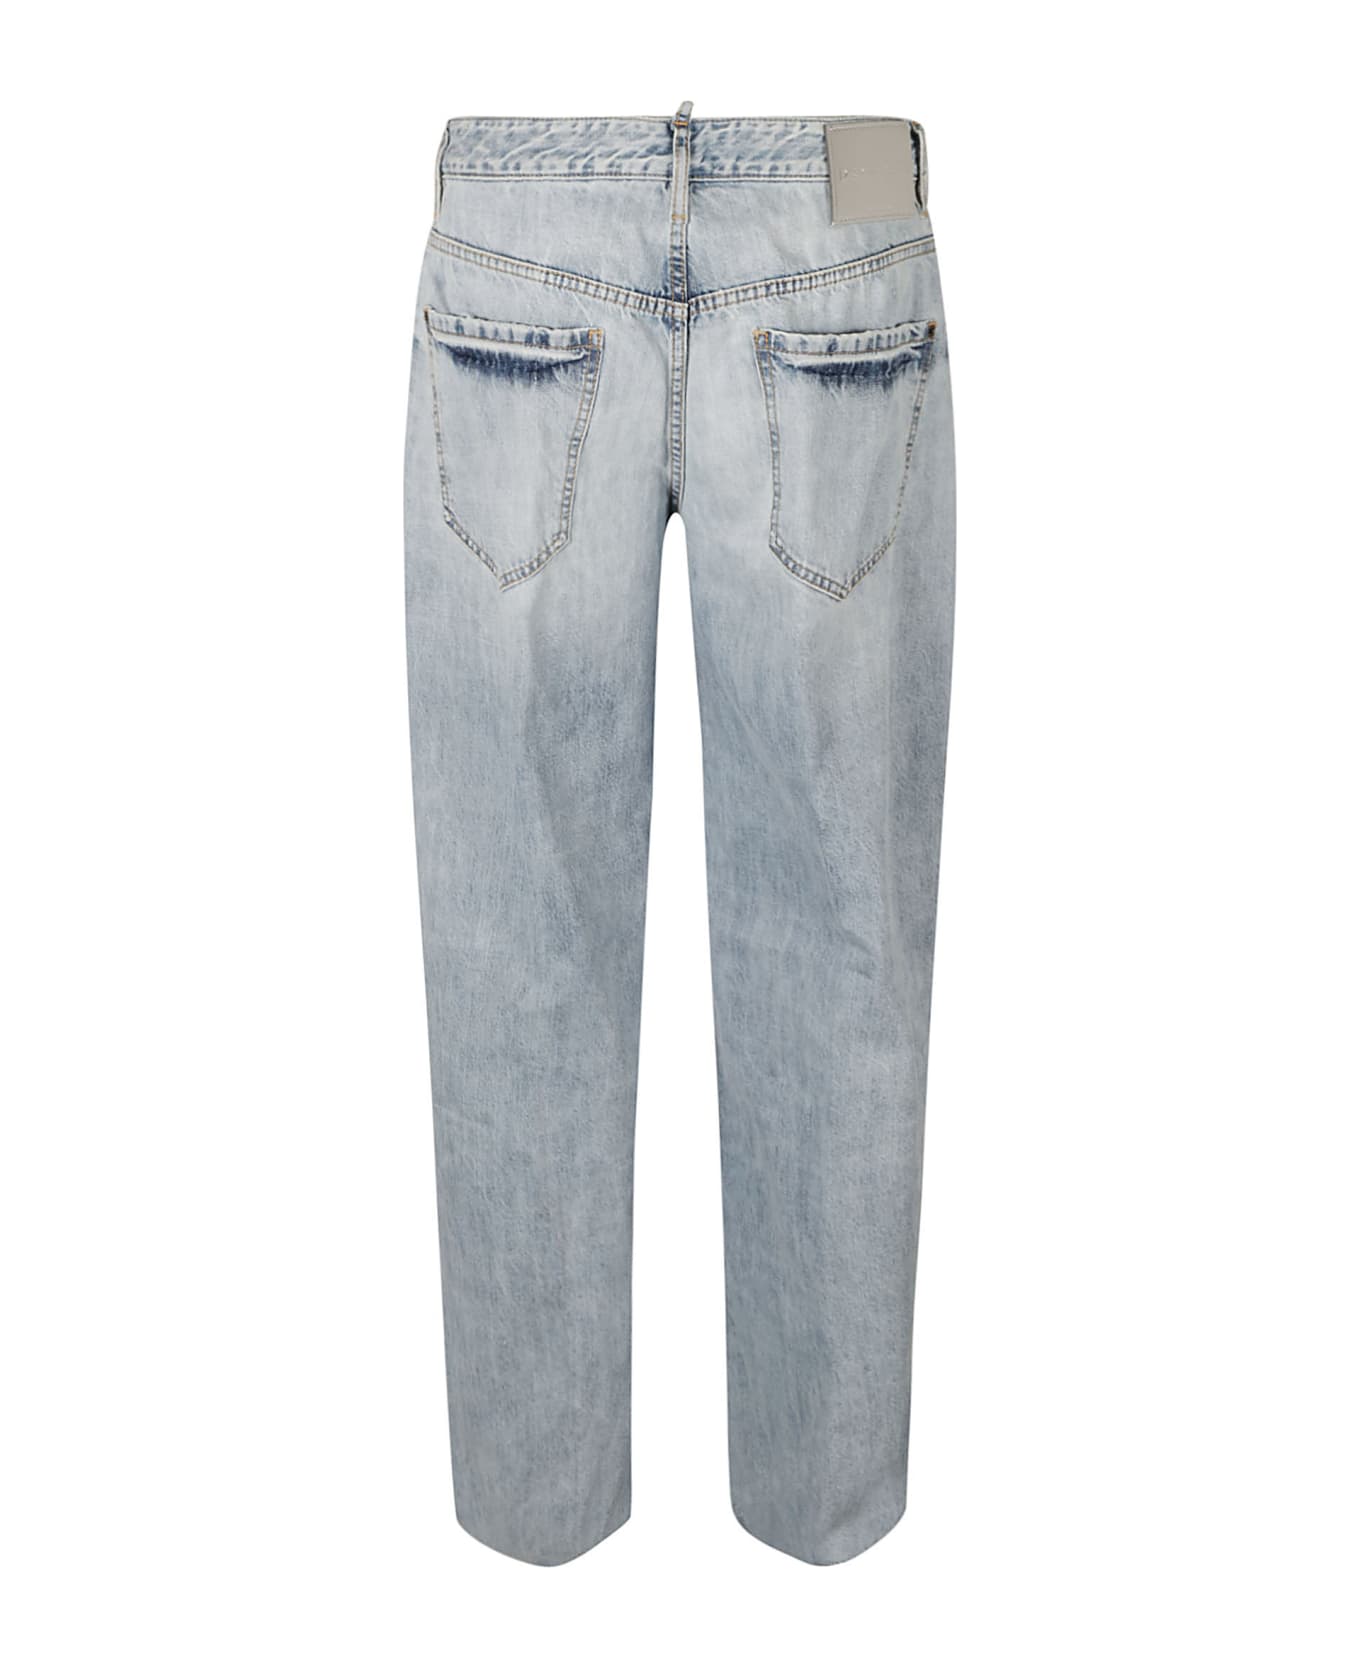 Dsquared2 Distressed Straight Jeans - Navy